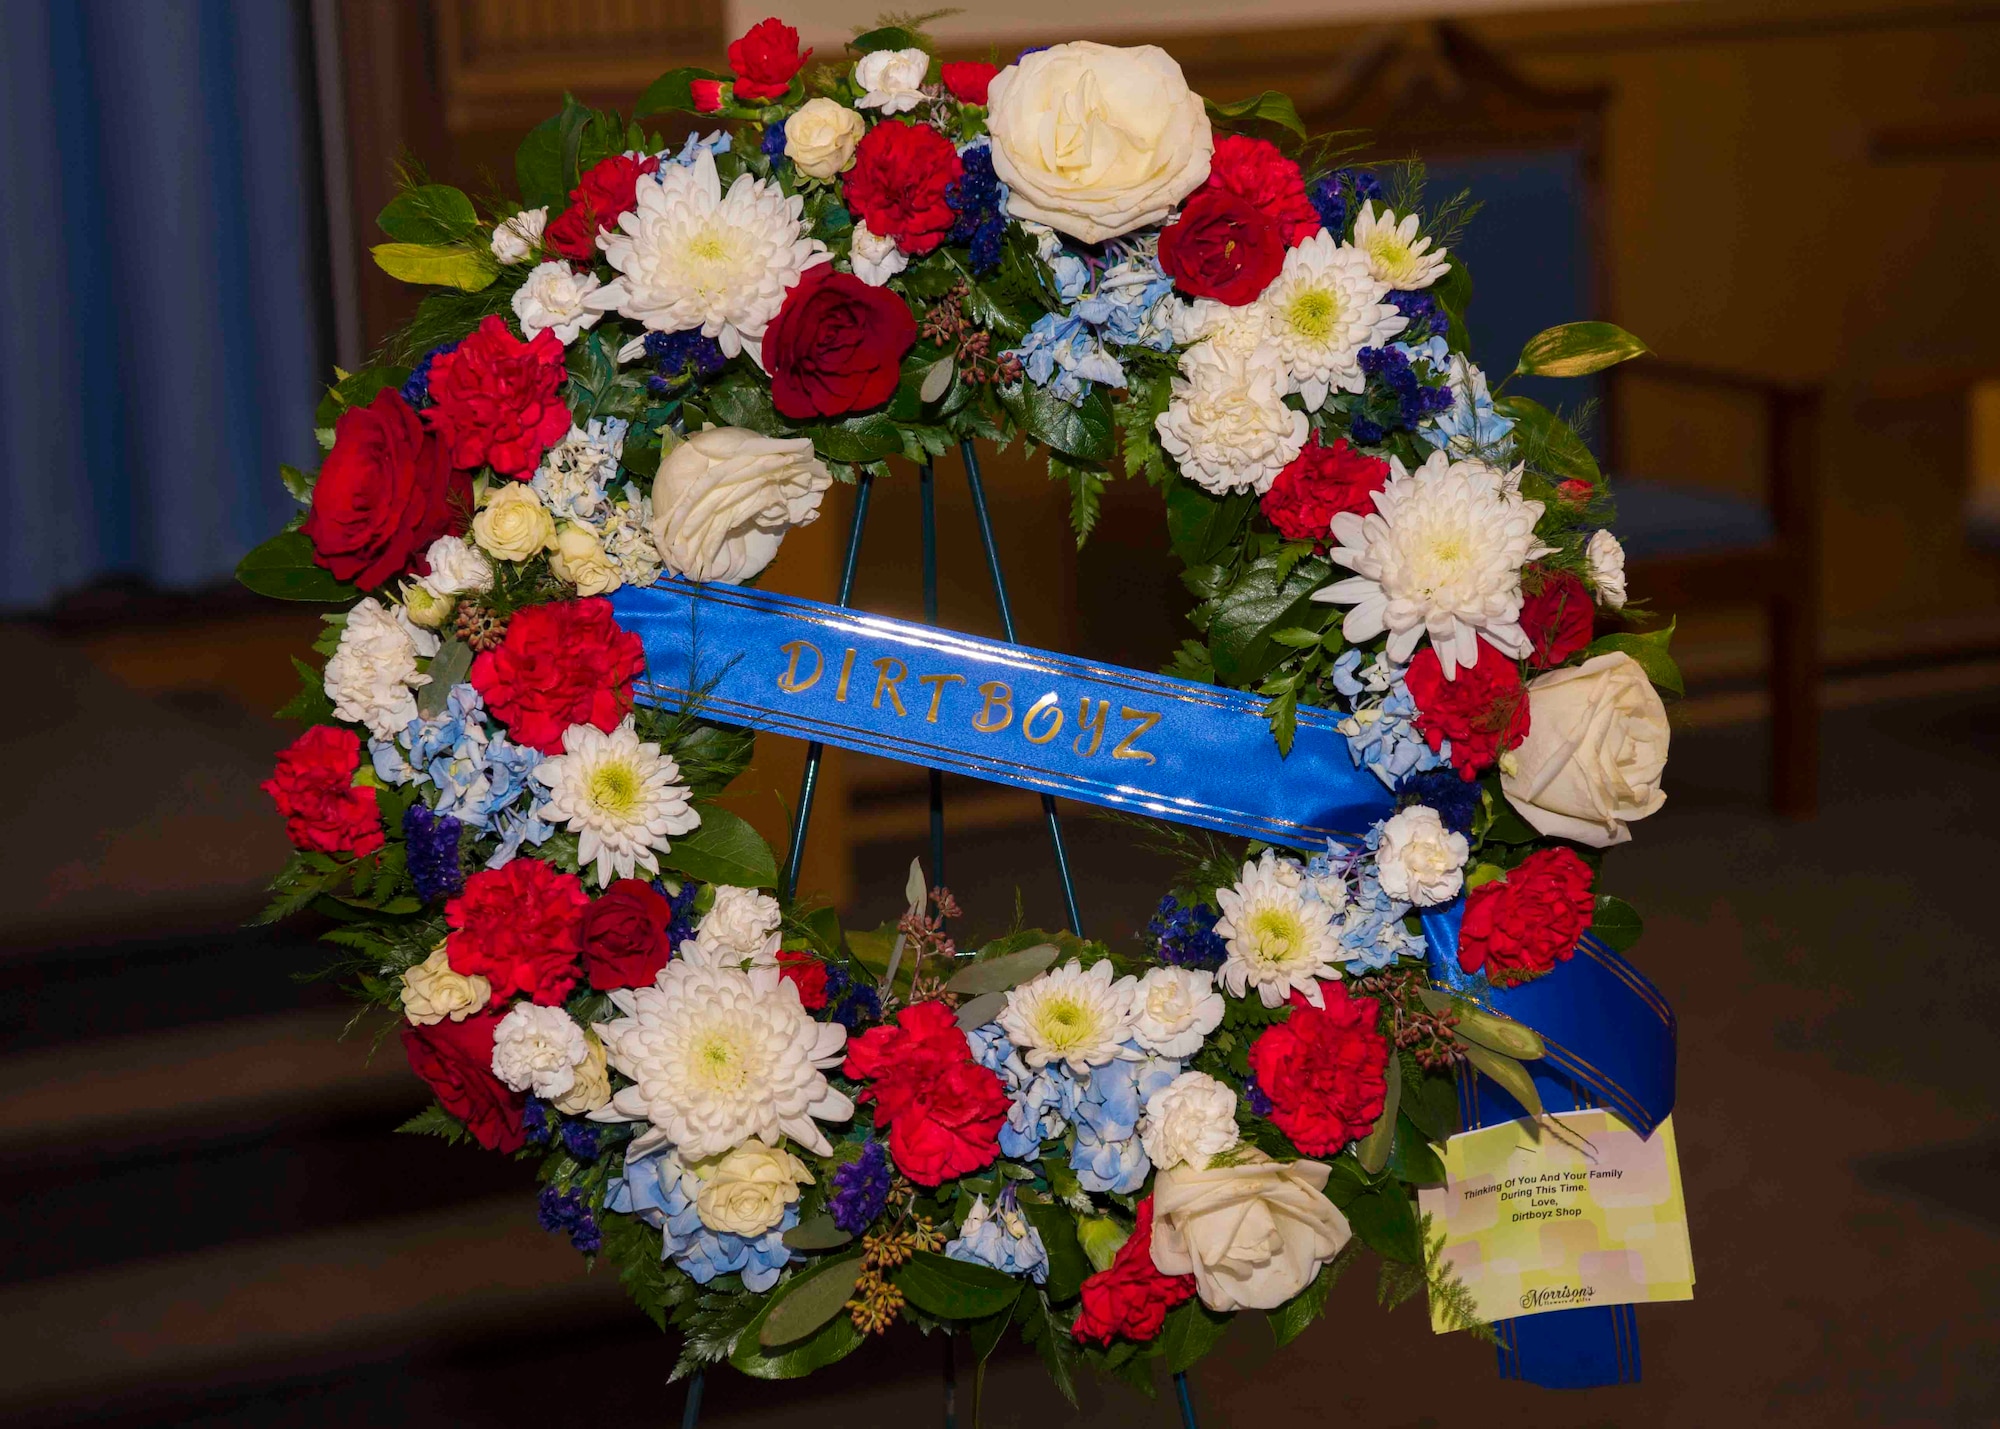 A wreath from the “Dirt Boyz” of the 633rd Civil Engineer Squadron sits on display at Bethel Chapel during the funeral service of U.S. Air Force Tech. Sgt. Jason Kelley, 633rd CES NCO in charge of pavements and equipment at Joint Base Langley-Eustis, Virginia, Jan. 21, 2019,. Kelley, who was part of the Dirt Boyz, passed away after a two-year battle with stage four esophageal cancer. (U.S. Air Force photo by Airman 1st Class Marcus M. Bullock)